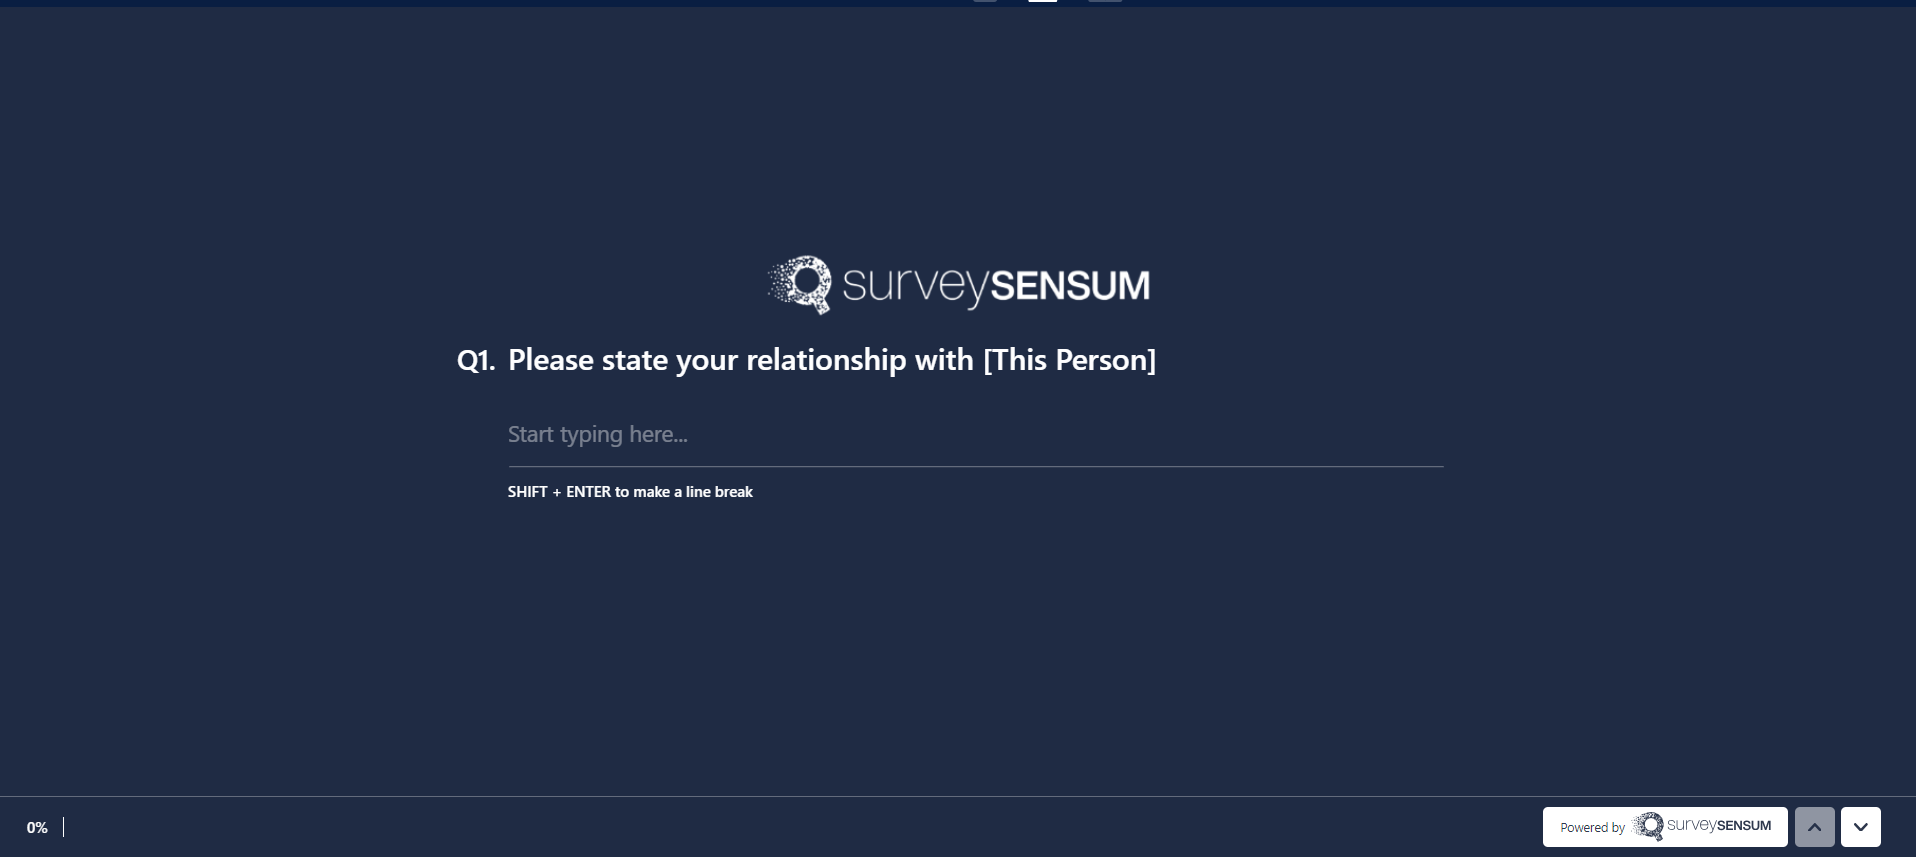 the image shows a question sample of the 360-degree surveys offered by SurveySensum for gathering comprehensive feedback from employees.